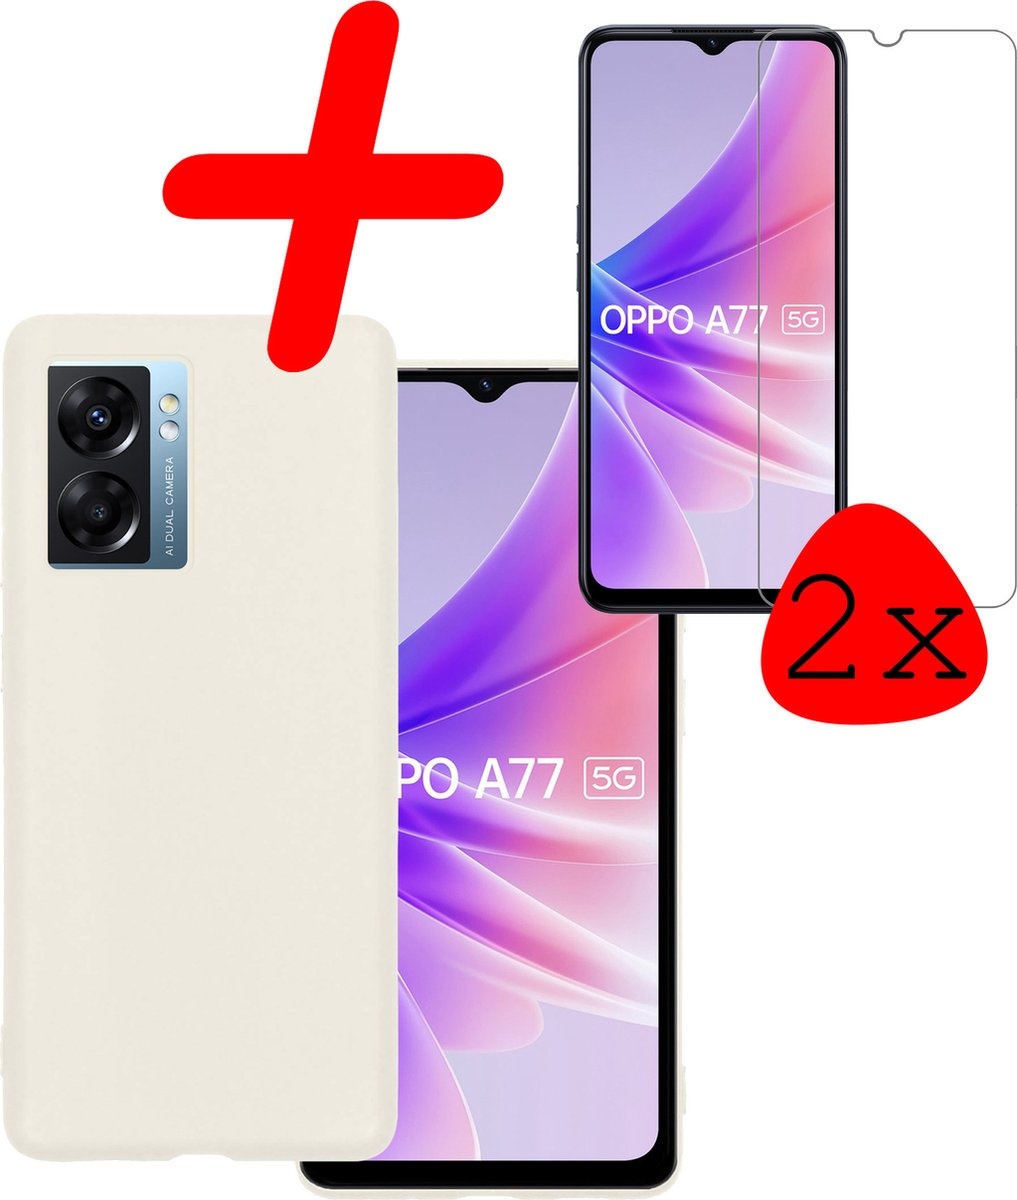 OPPO A77 Hoesje Siliconen Back Cover Case Met 2x Screenprotector - OPPO A77 Hoes Silicone Case Hoesje - Wit